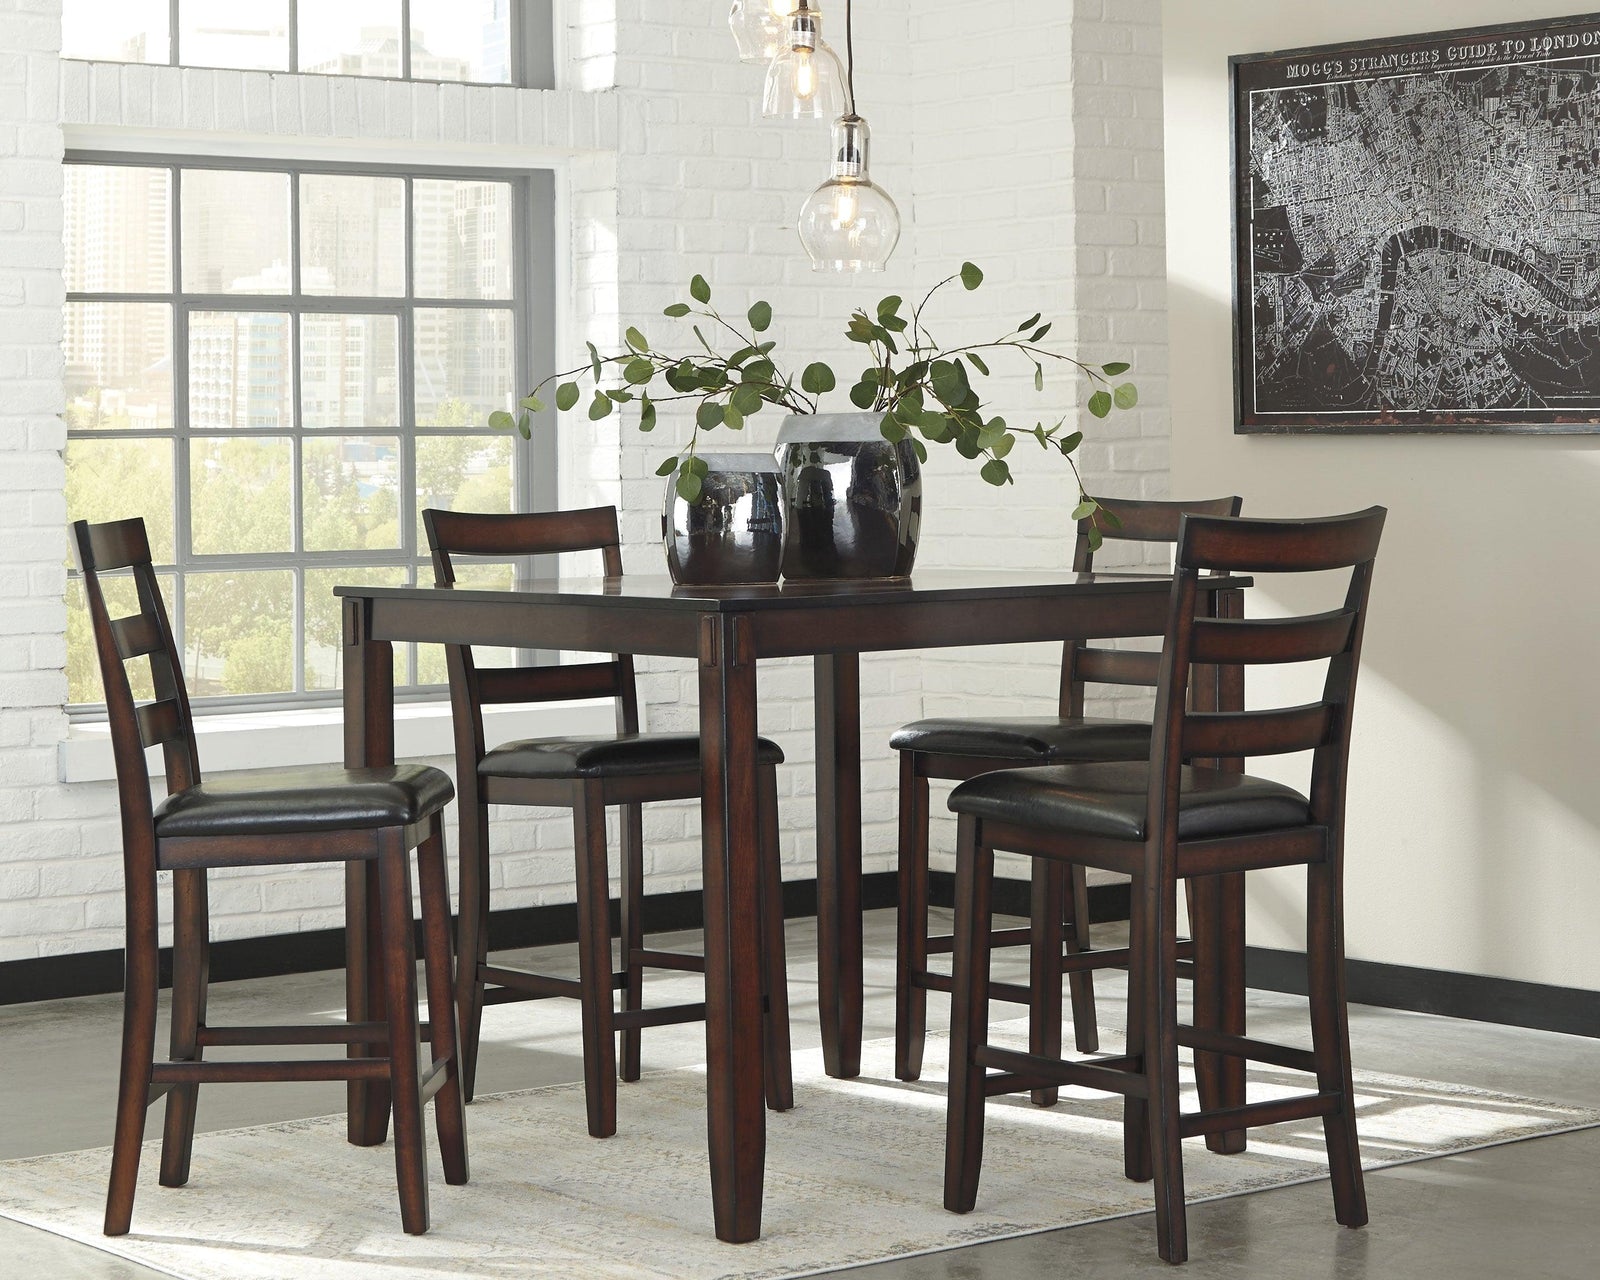 Coviar Brown Faux Leather Counter Height Dining Table And Bar Stools (Set Of 5) - Ella Furniture